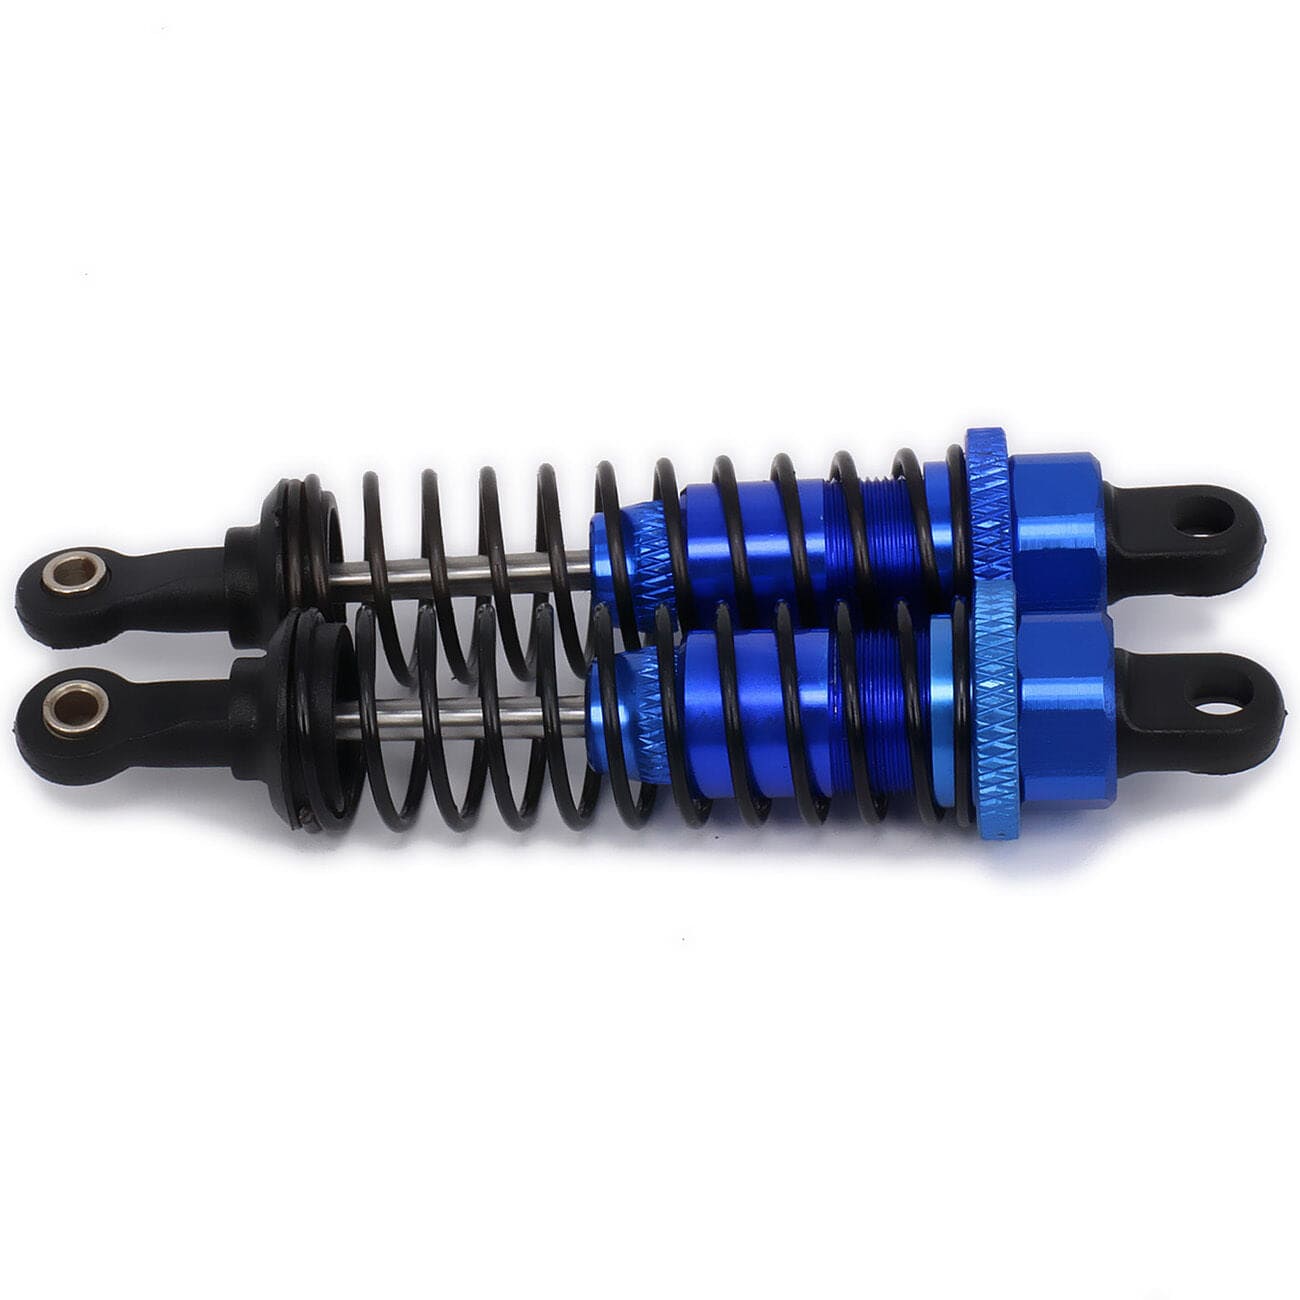 RCAWD RC CAR UPGRADE PARTS Dark Blue RCAWD 70mm Shock Absorber Damper Oil Adjustable 2PCS For Rc Car 1/16 Model Car